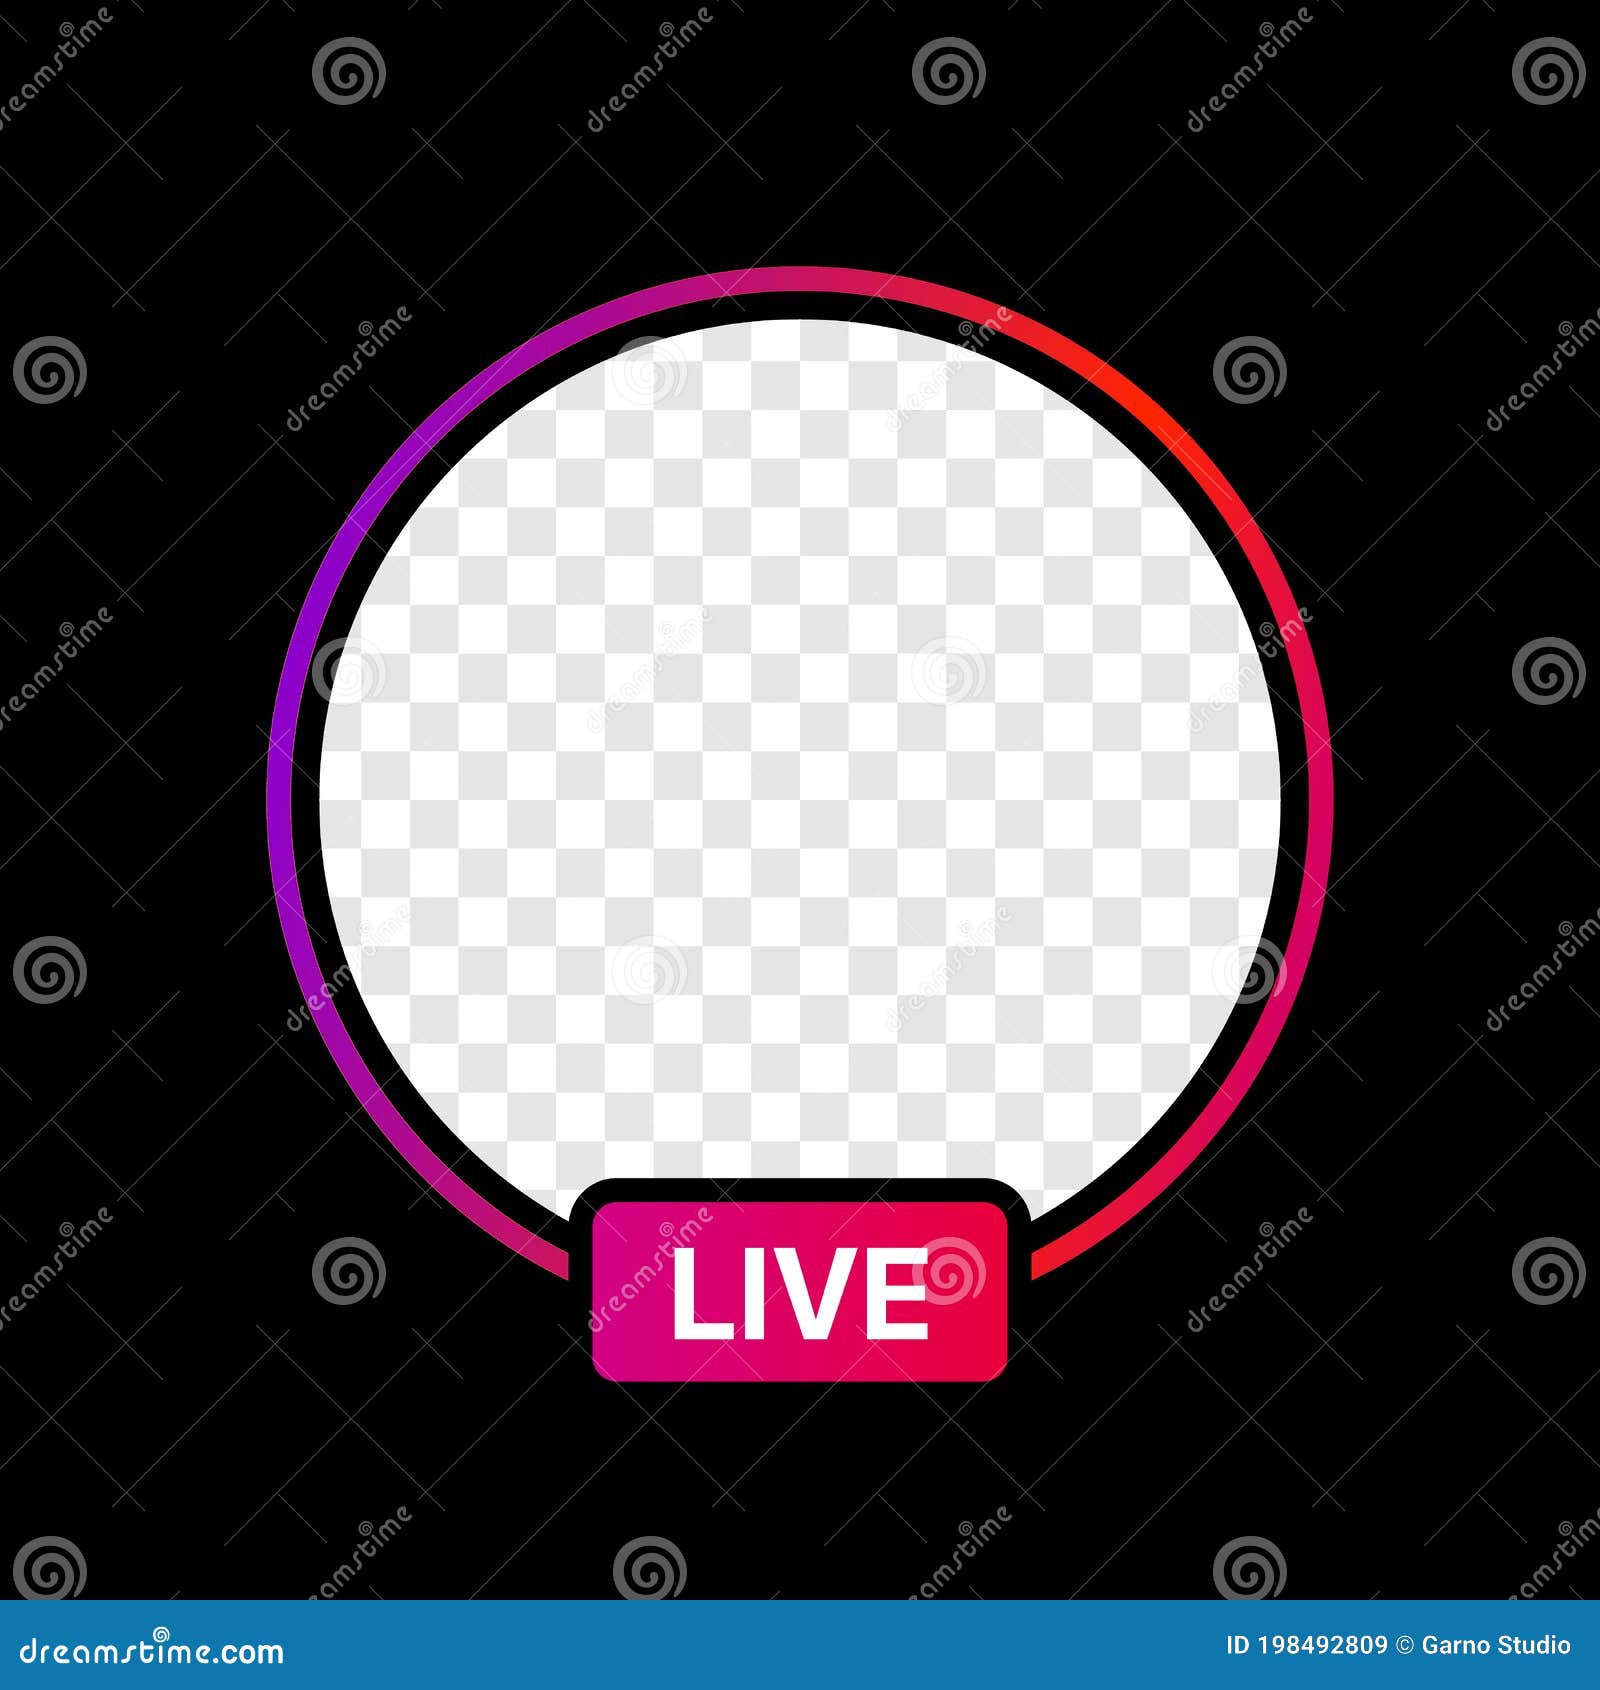 Instagram Profile Live Icon Interface. Transparent Placeholder Stock Vector  - Illustration of design, circle: 198492809